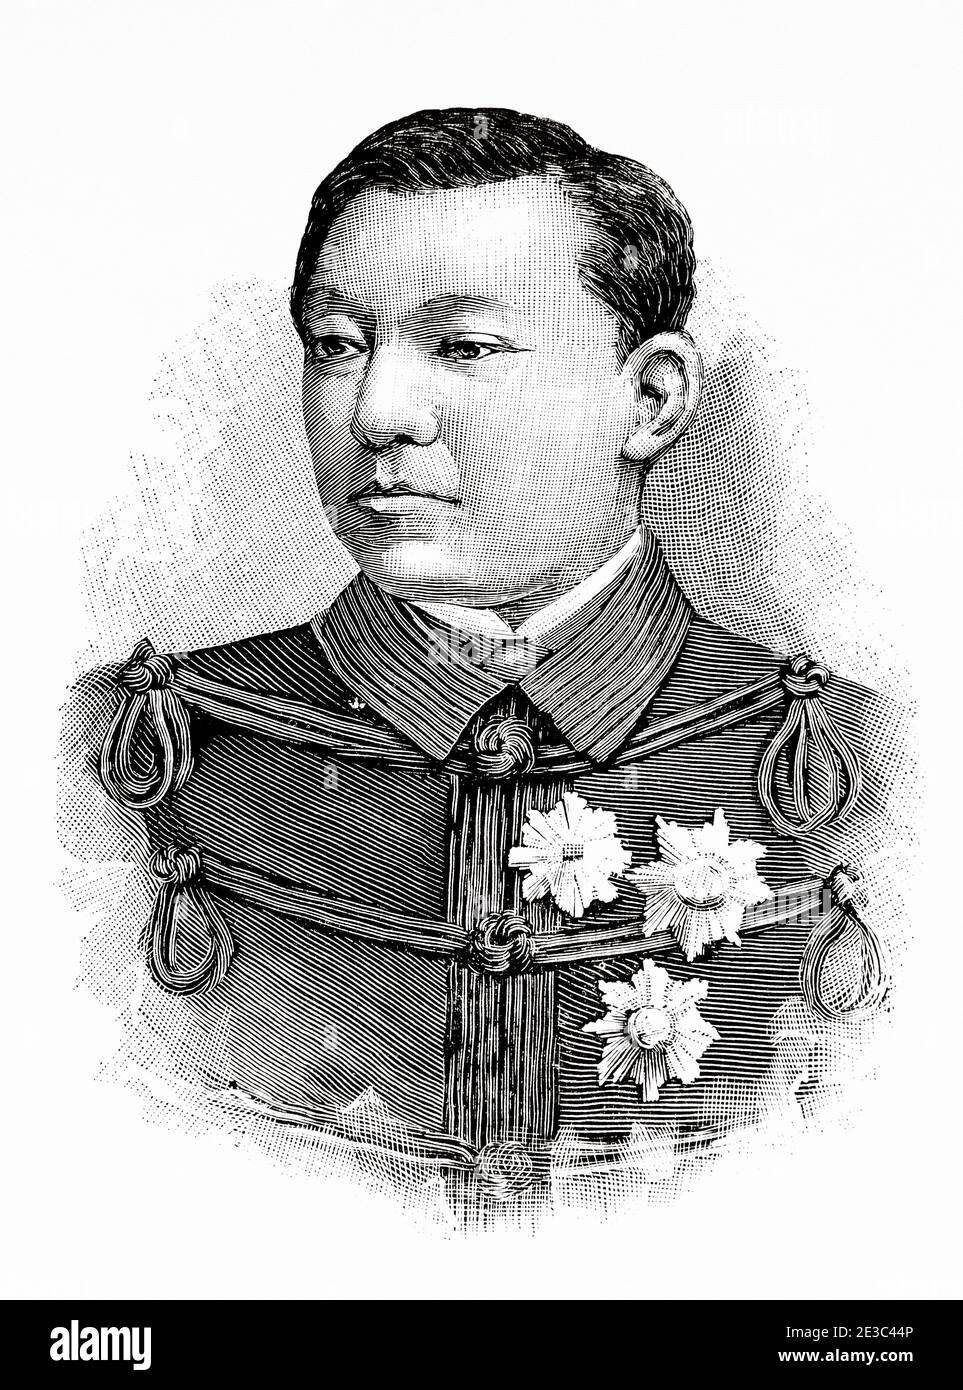 Portrait of Prince Oyama Iwao (1842-1916), Japanese military and politician. Japanese field marshal, and a founder of the Imperial Japanese Army, Japan. Old XIX century engraved illustration from La Ilustracion Española y Americana 1894 Stock Photo